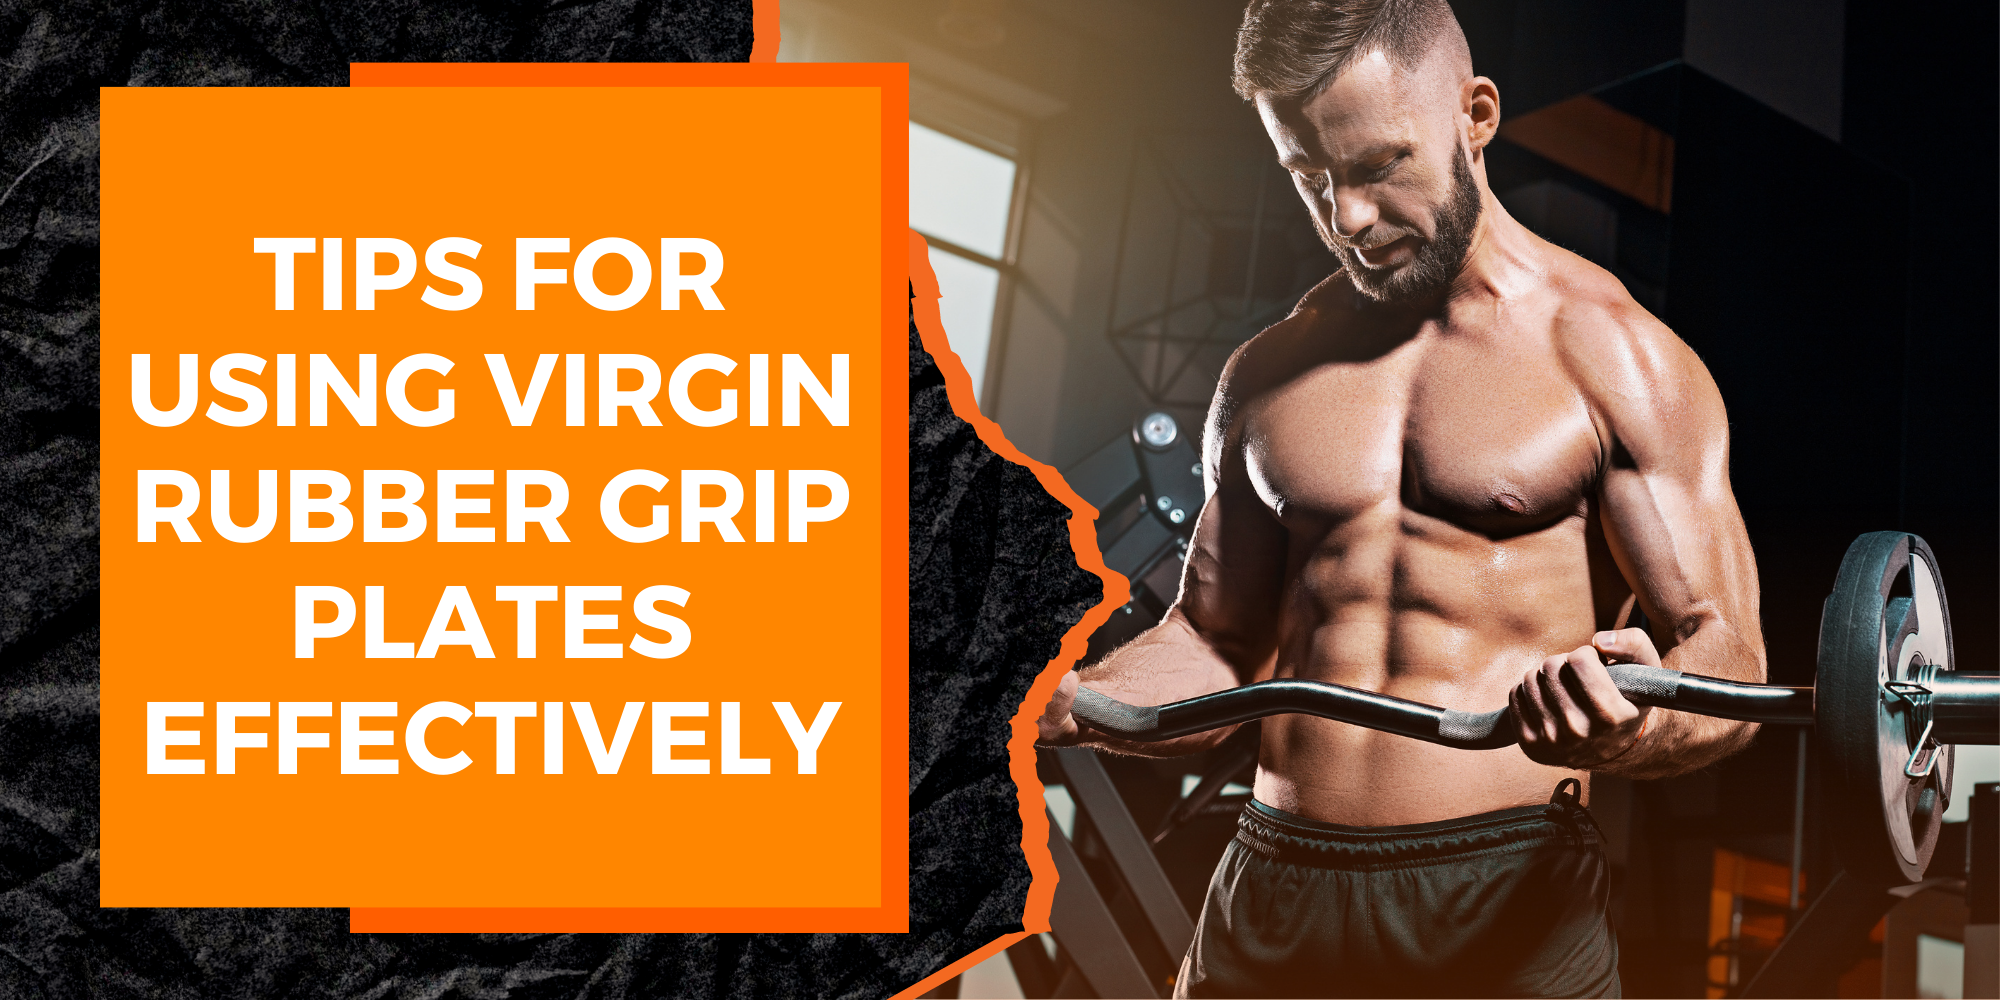 Tips for Using Virgin Rubber Grip Plates Effectively